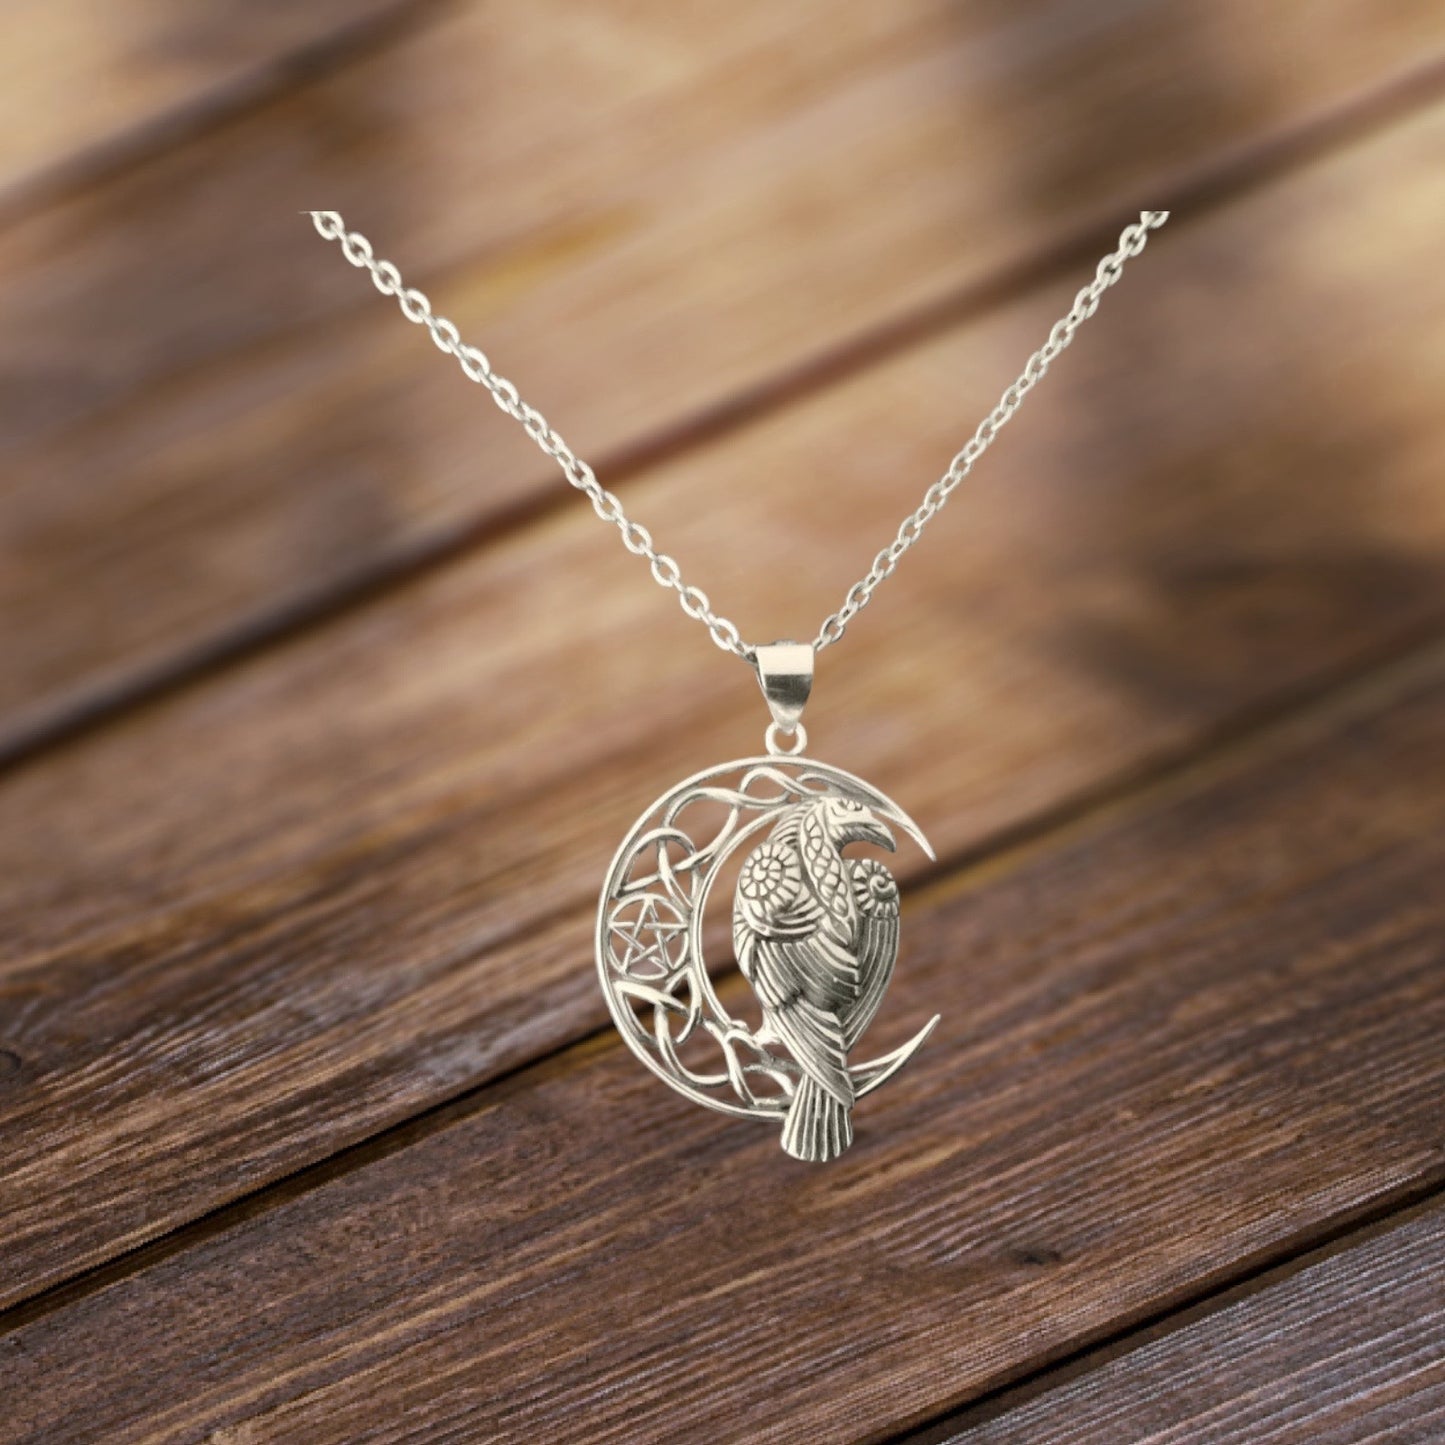 Handcast 925 Sterling Silver Raven Pendant on Crescent Moon accented with Celtic Knotwork + Free Chain